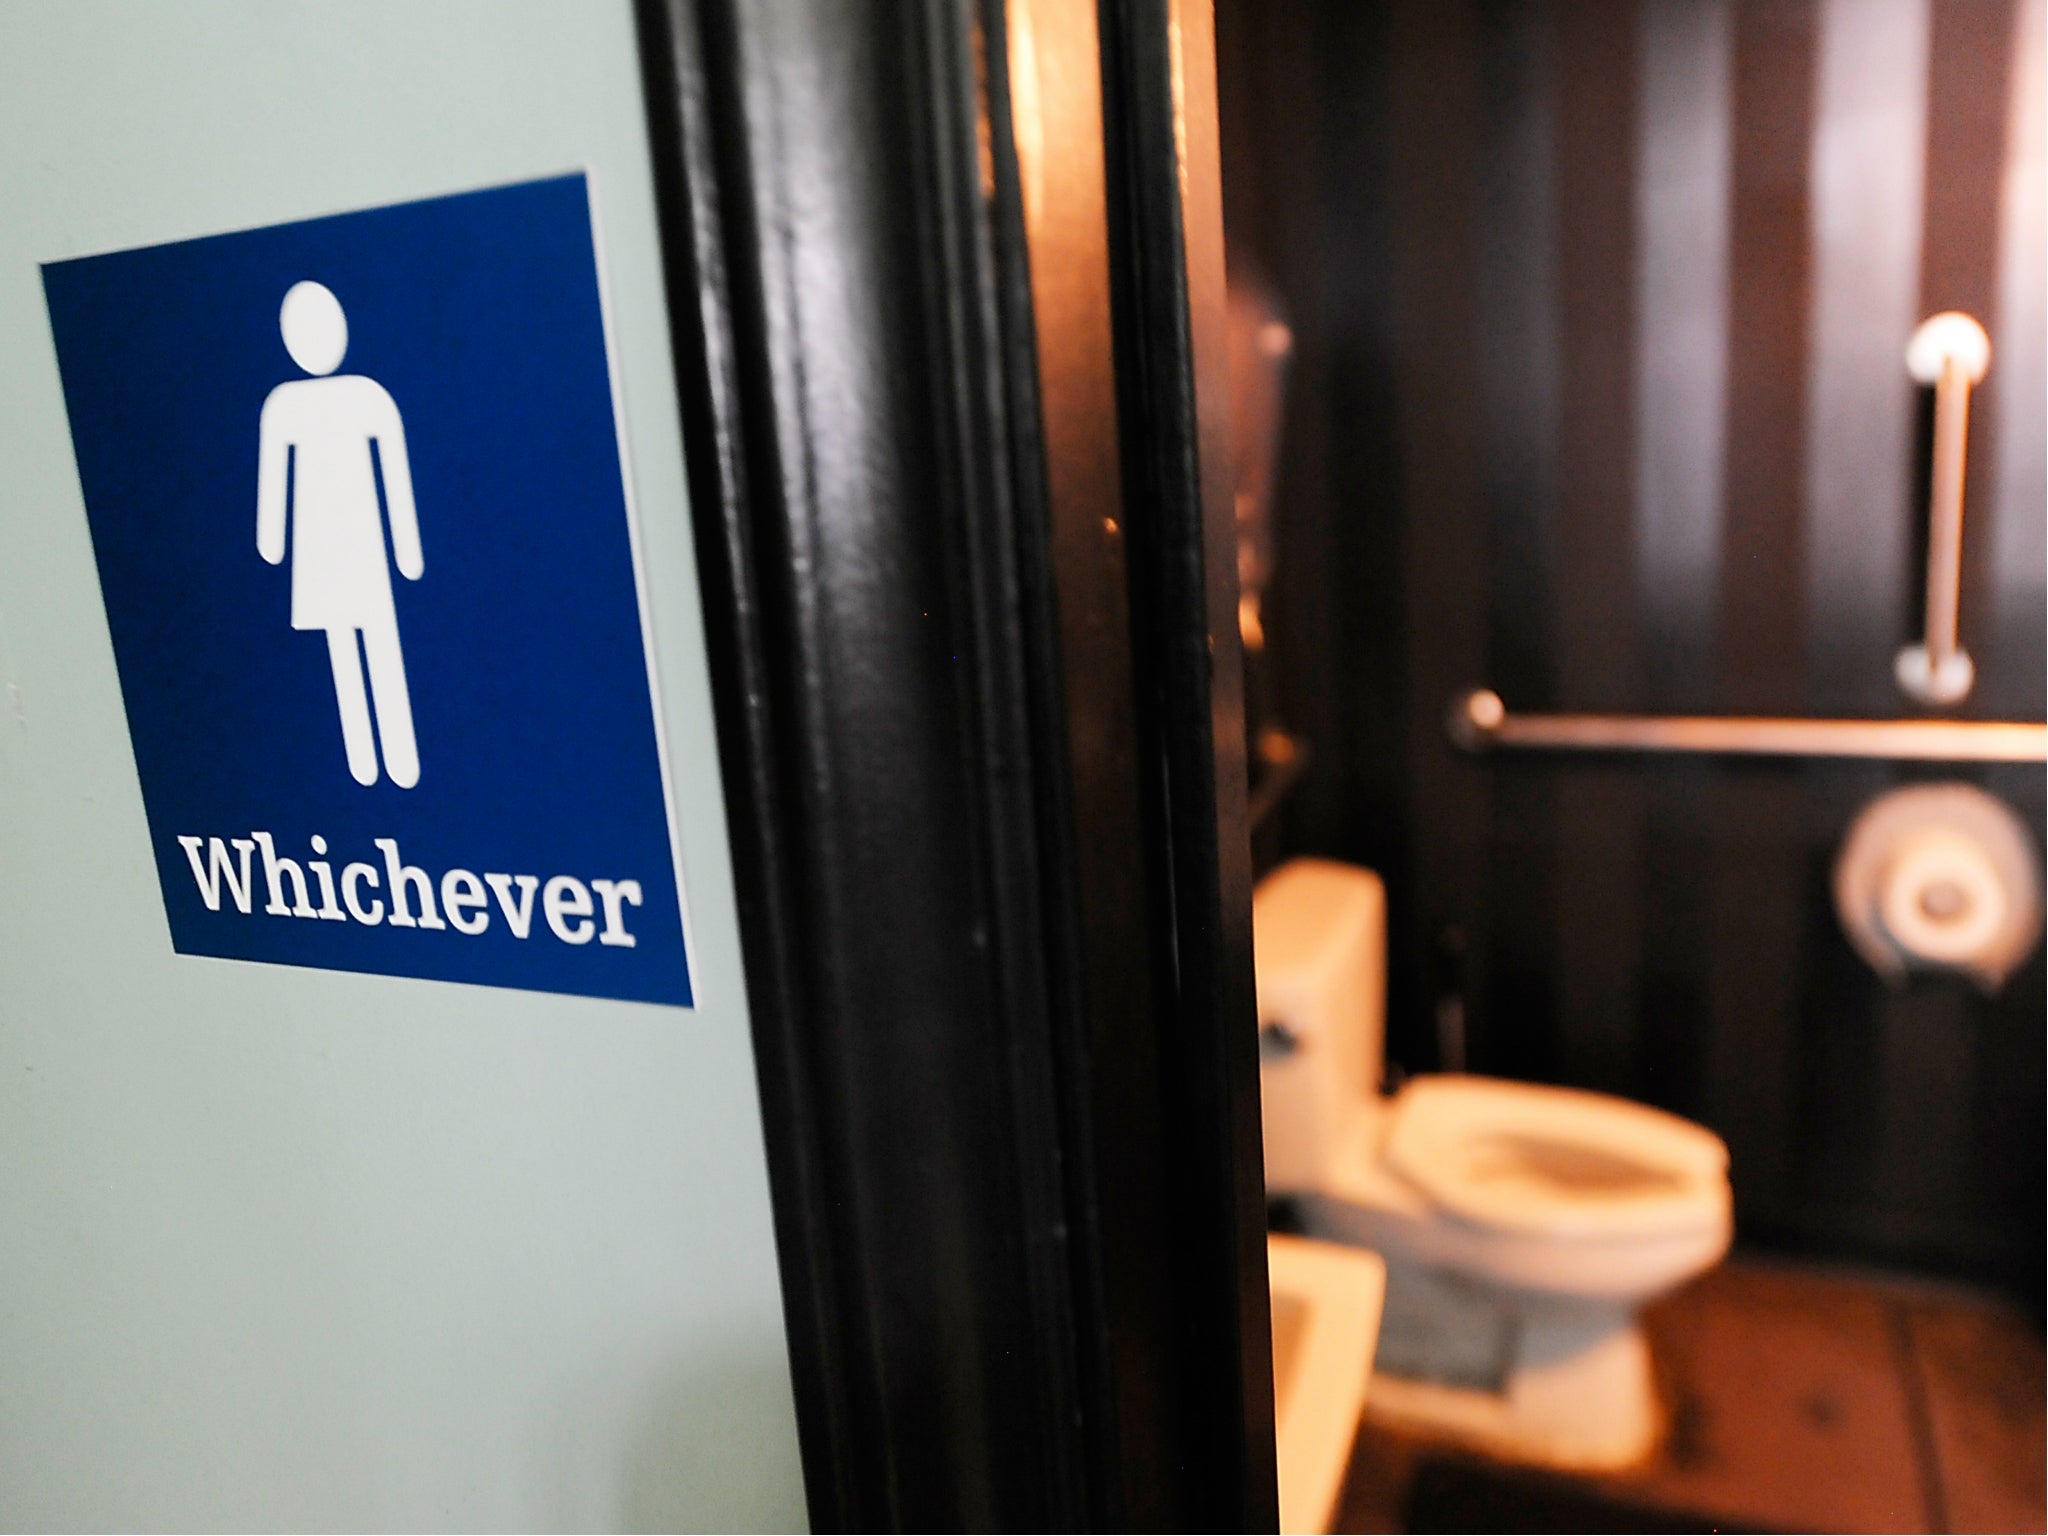 Just because a society separates bathrooms doesn’t mean it cares about protecting women